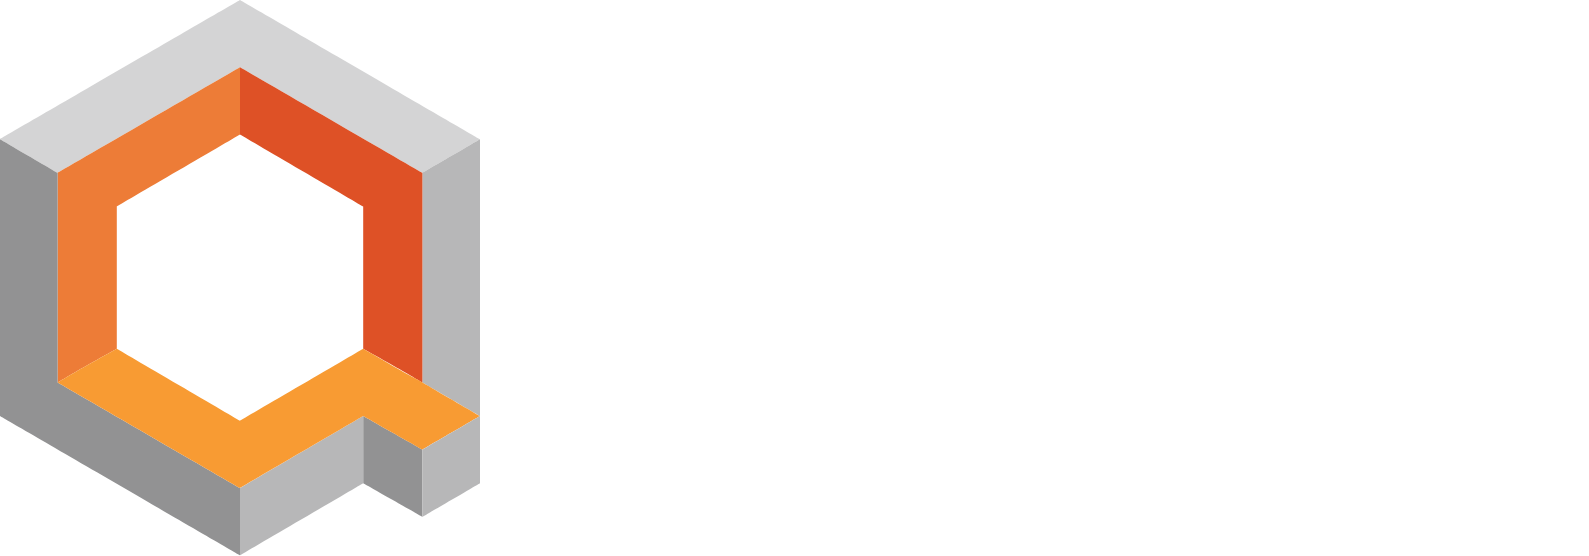 IonQ logo large for dark backgrounds (transparent PNG)